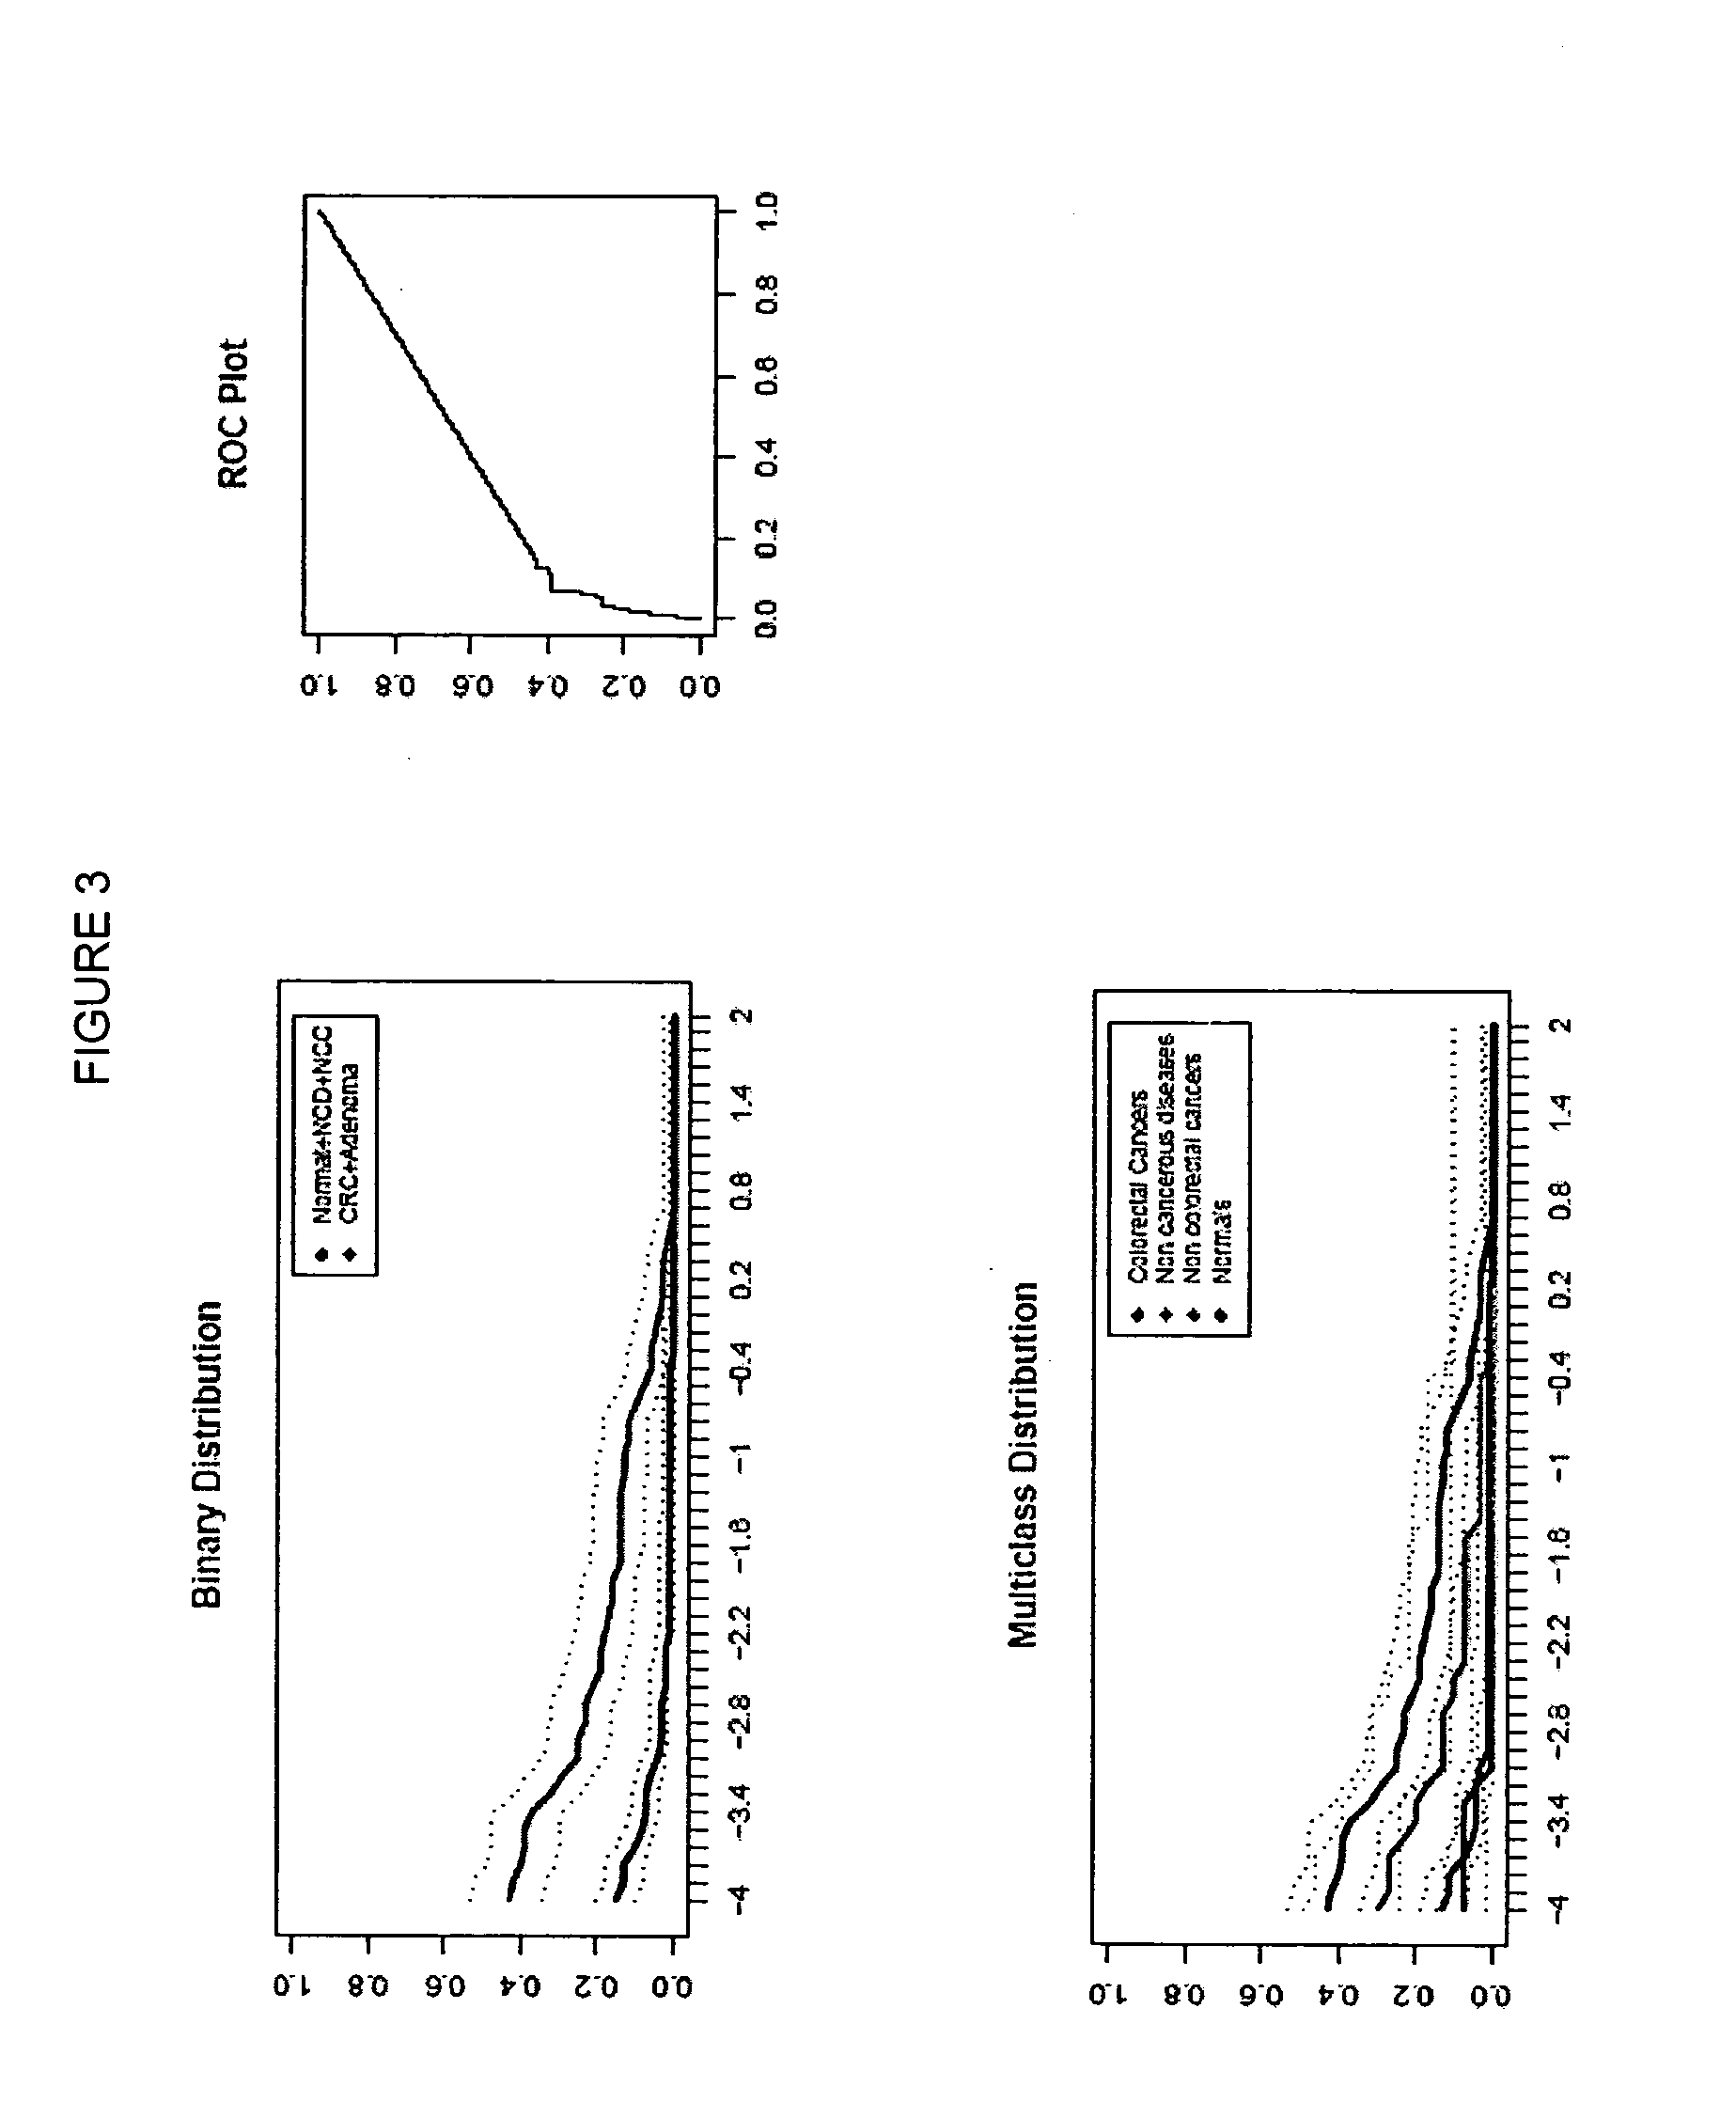 Methods and nucleic acids for analyses of cellular proliferative disorders